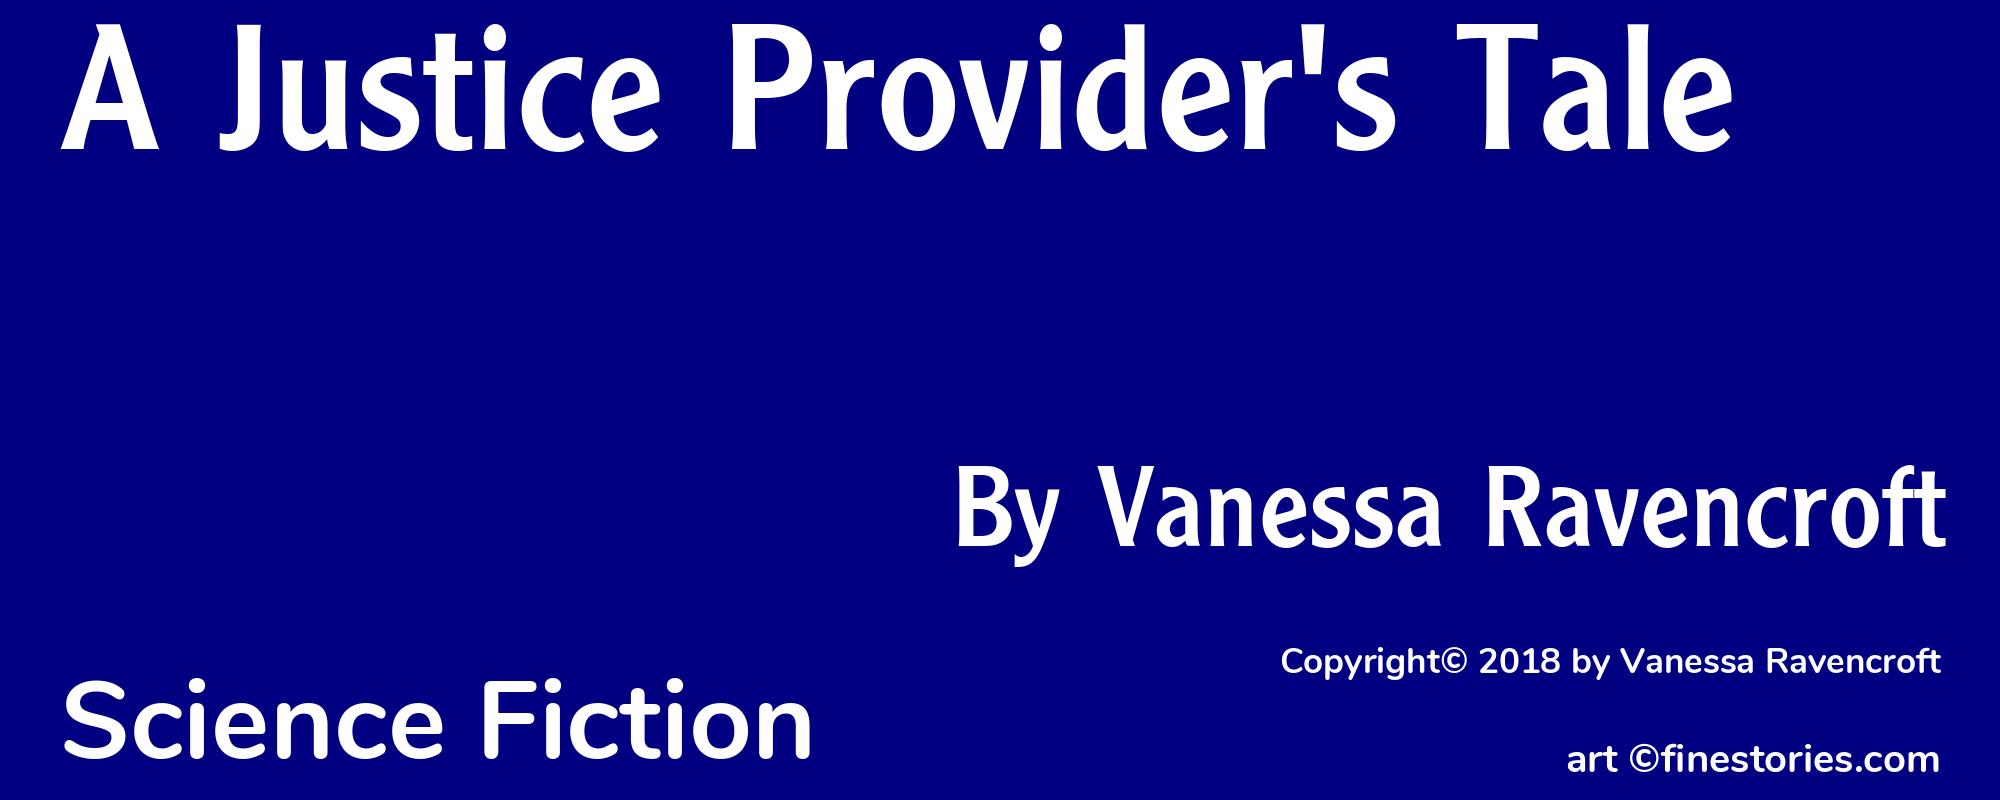 A Justice Provider's Tale - Cover